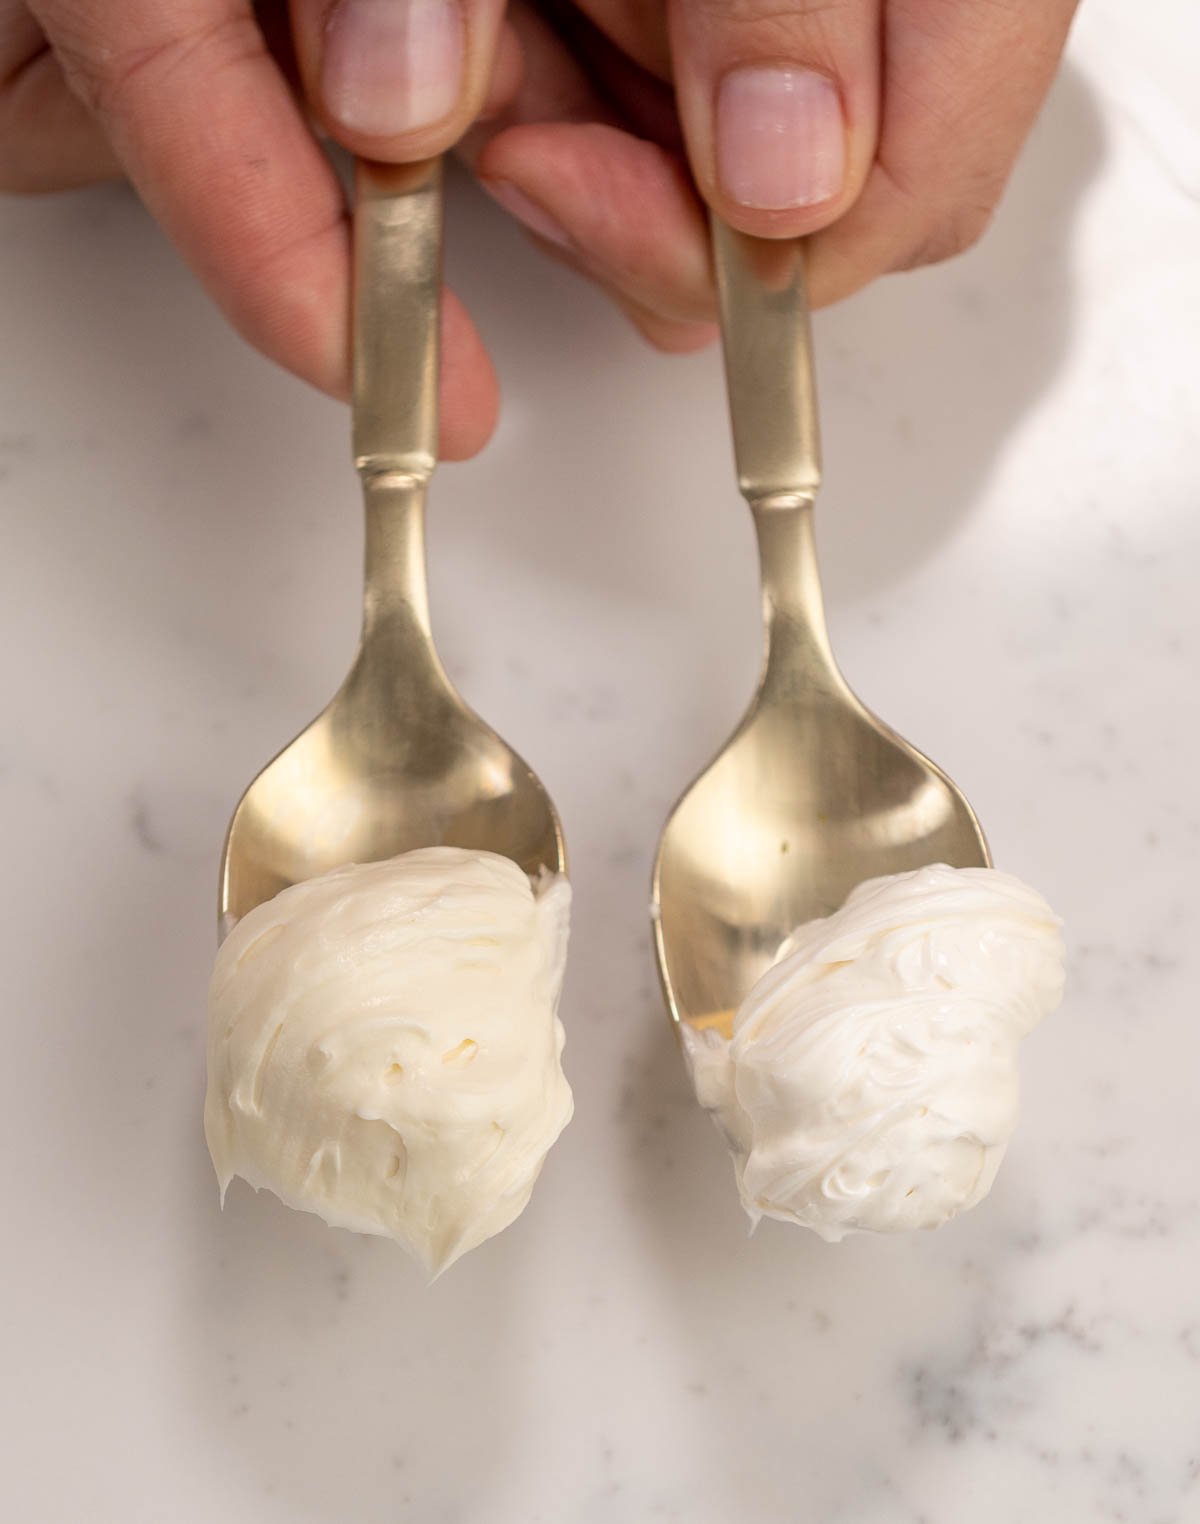 side by side spoons with buttercreams to show the pure white vs regular. 